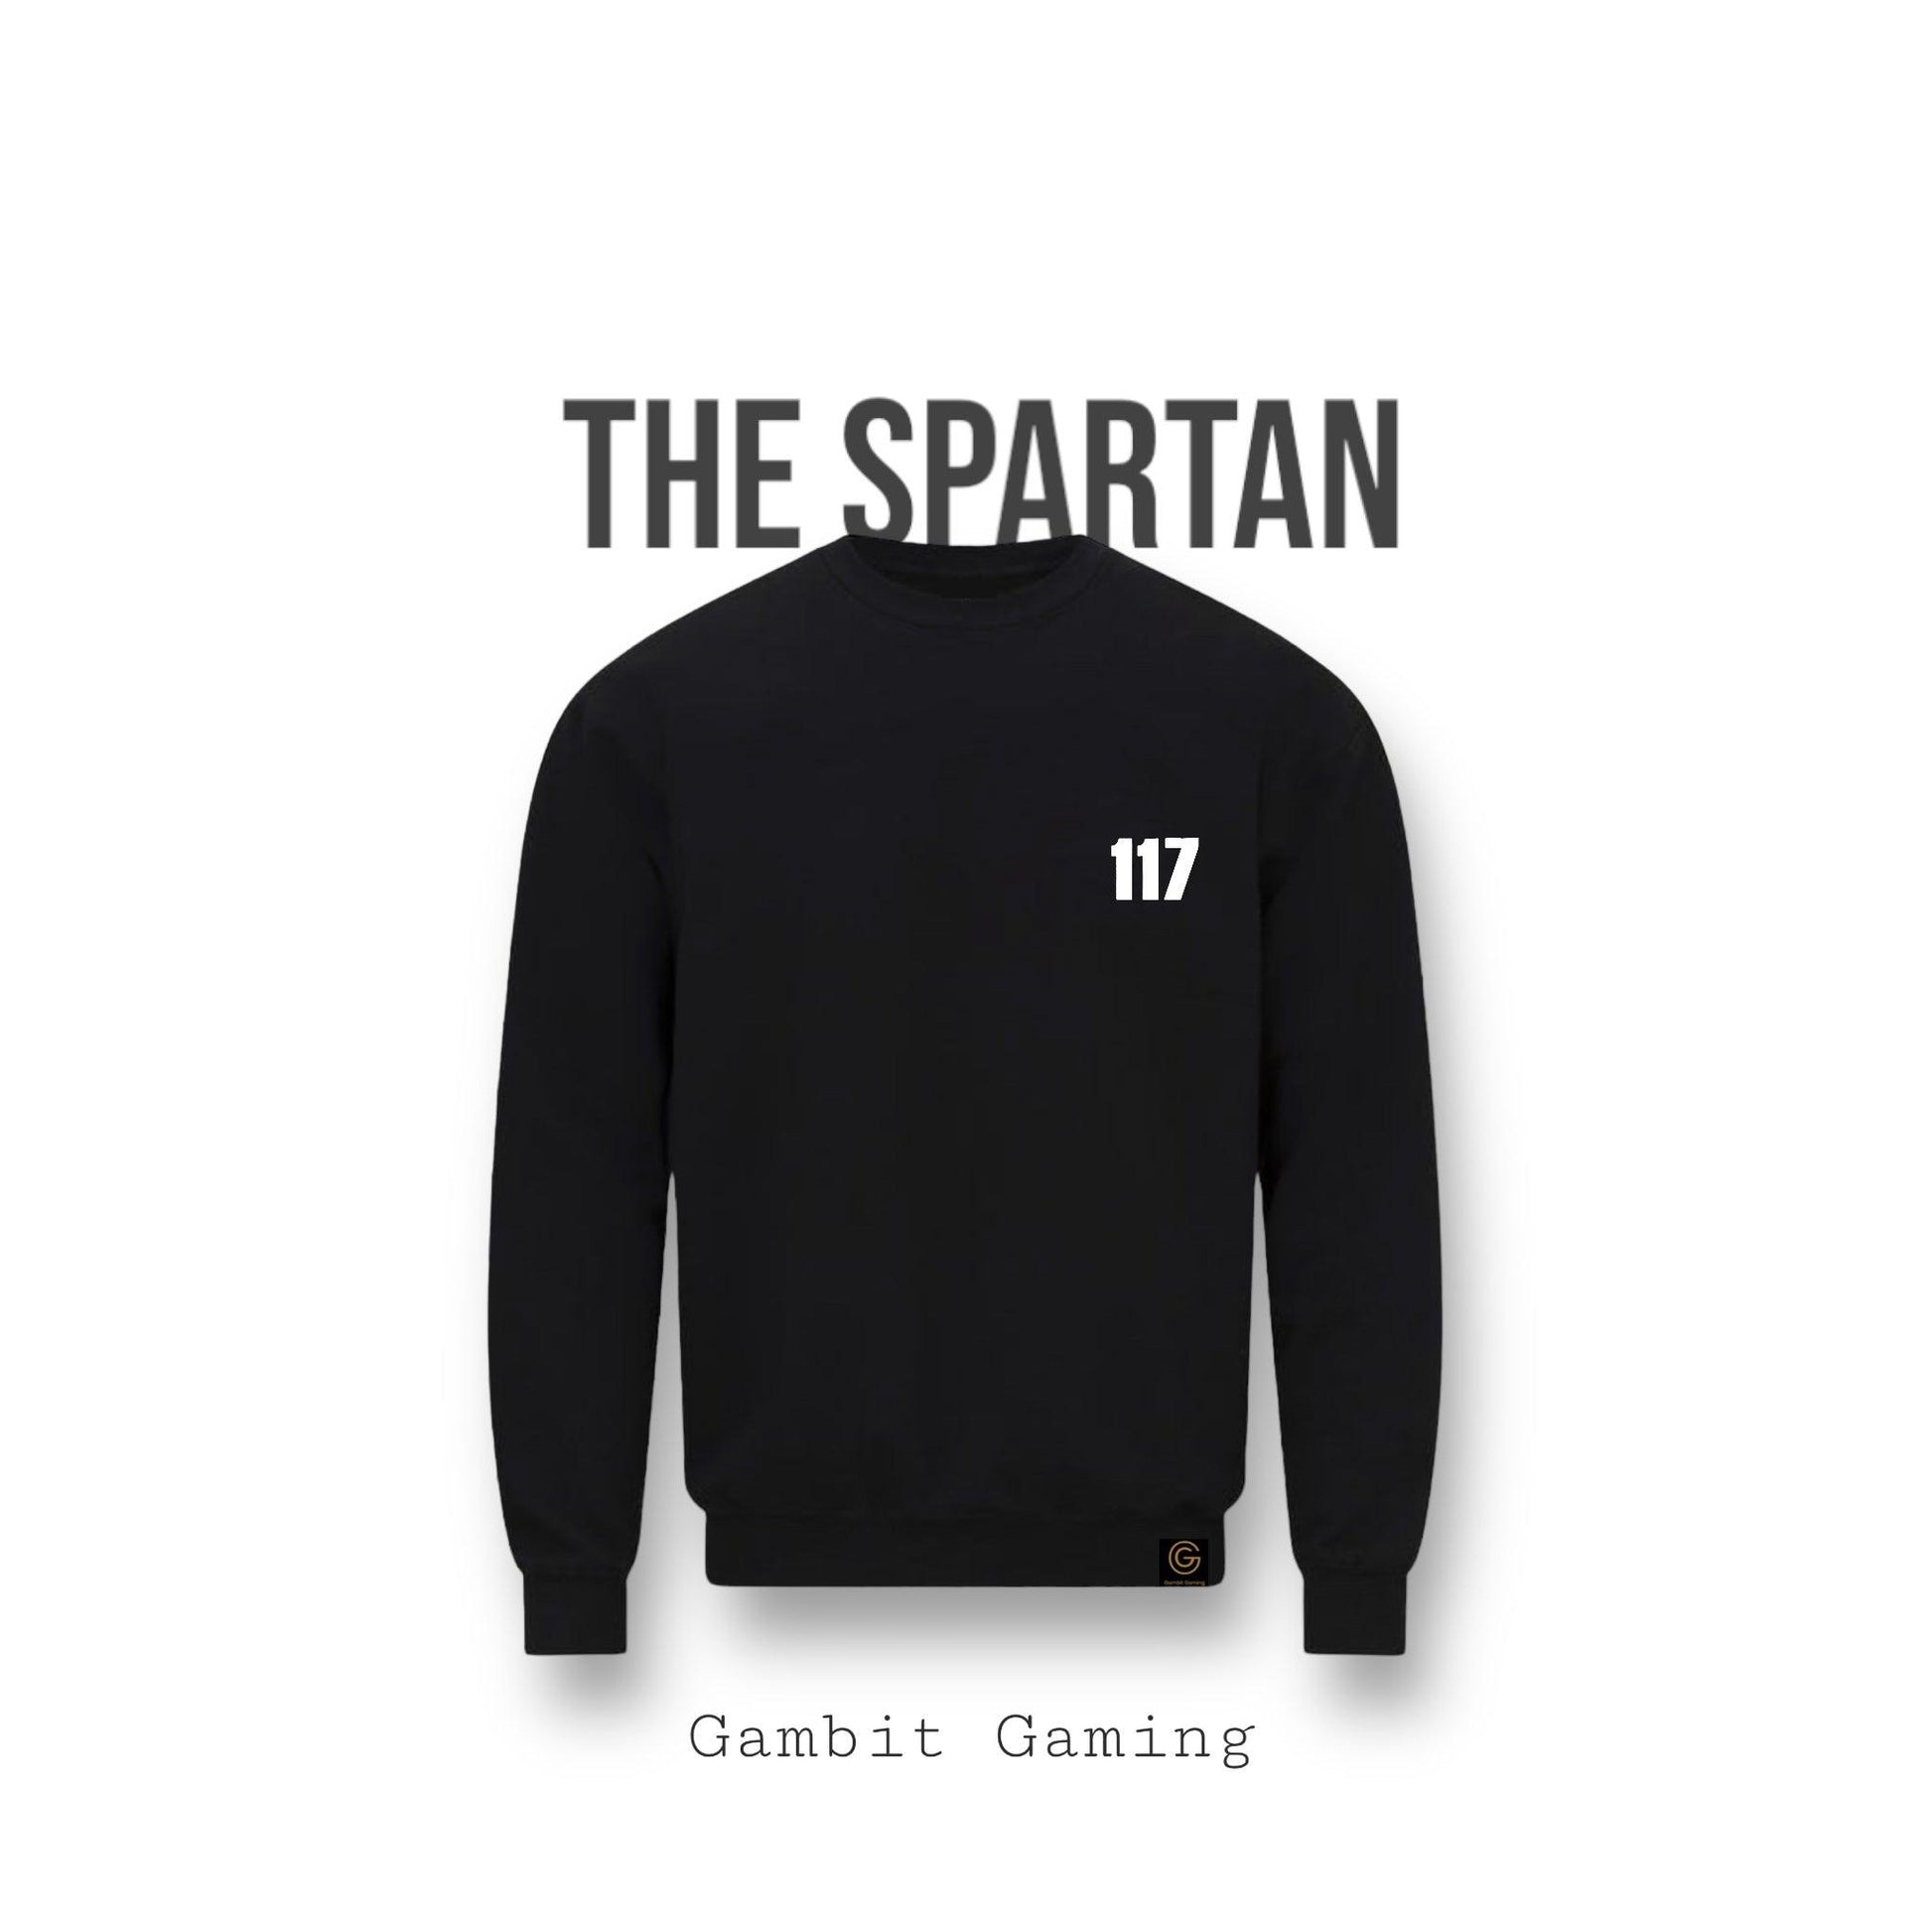 The Spartan Sweater - Gambit Gaming